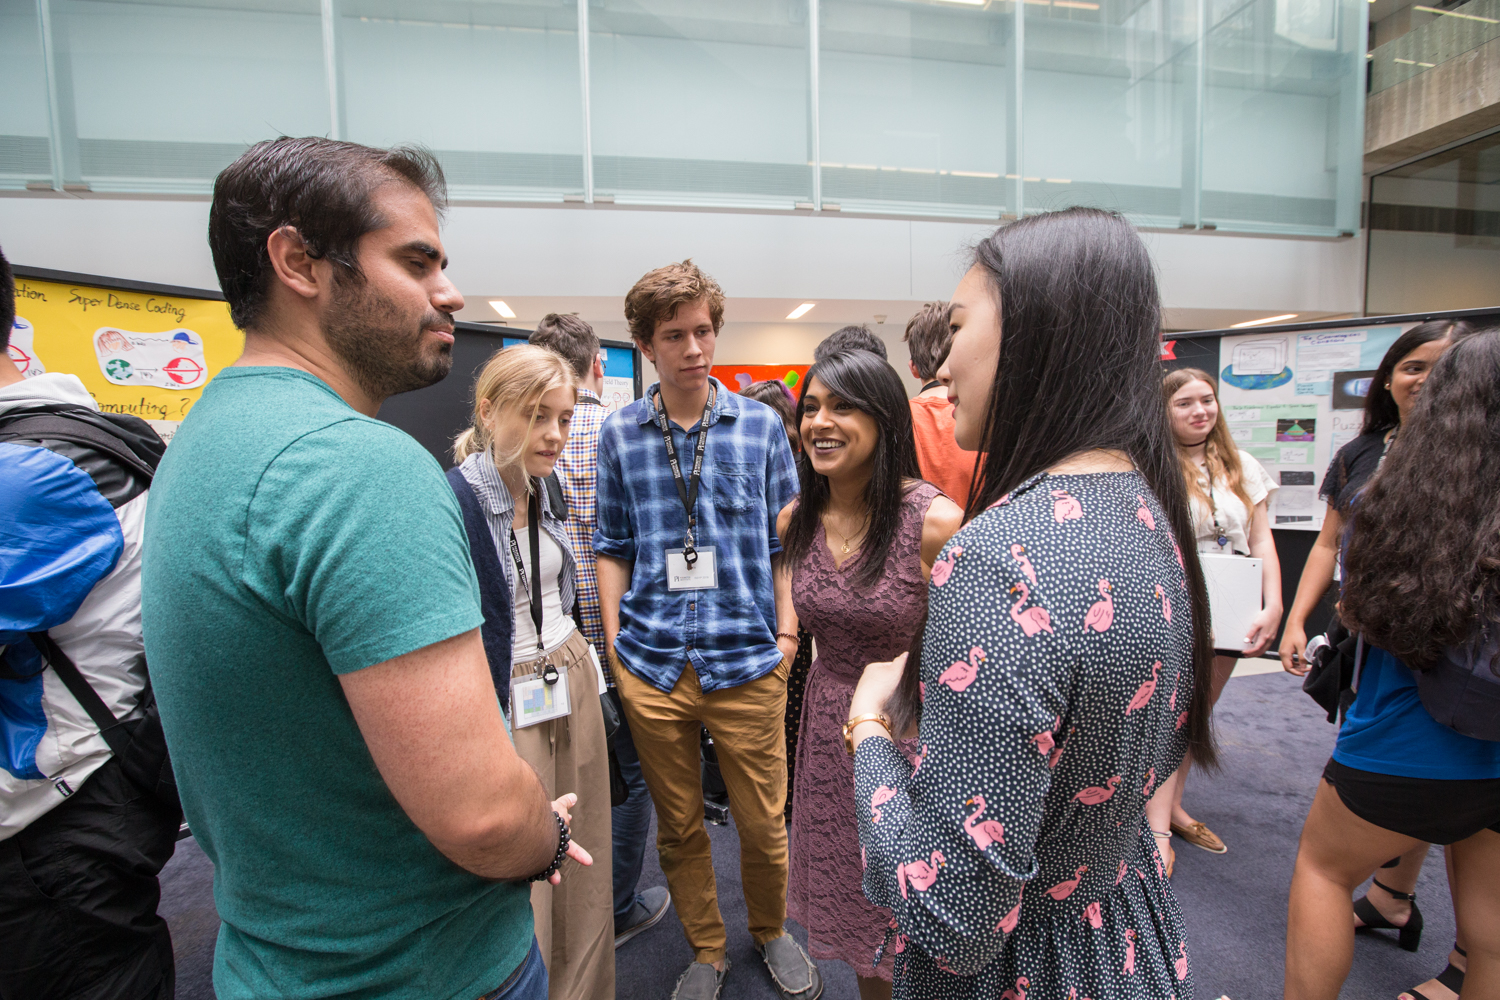 Taylor Walters and Benjamin Dobozy chatting with researchers and the Honourable Bardish Chagger, Member of Parliament for the riding of Waterloo and current Leader of the Government in the House of Commons.